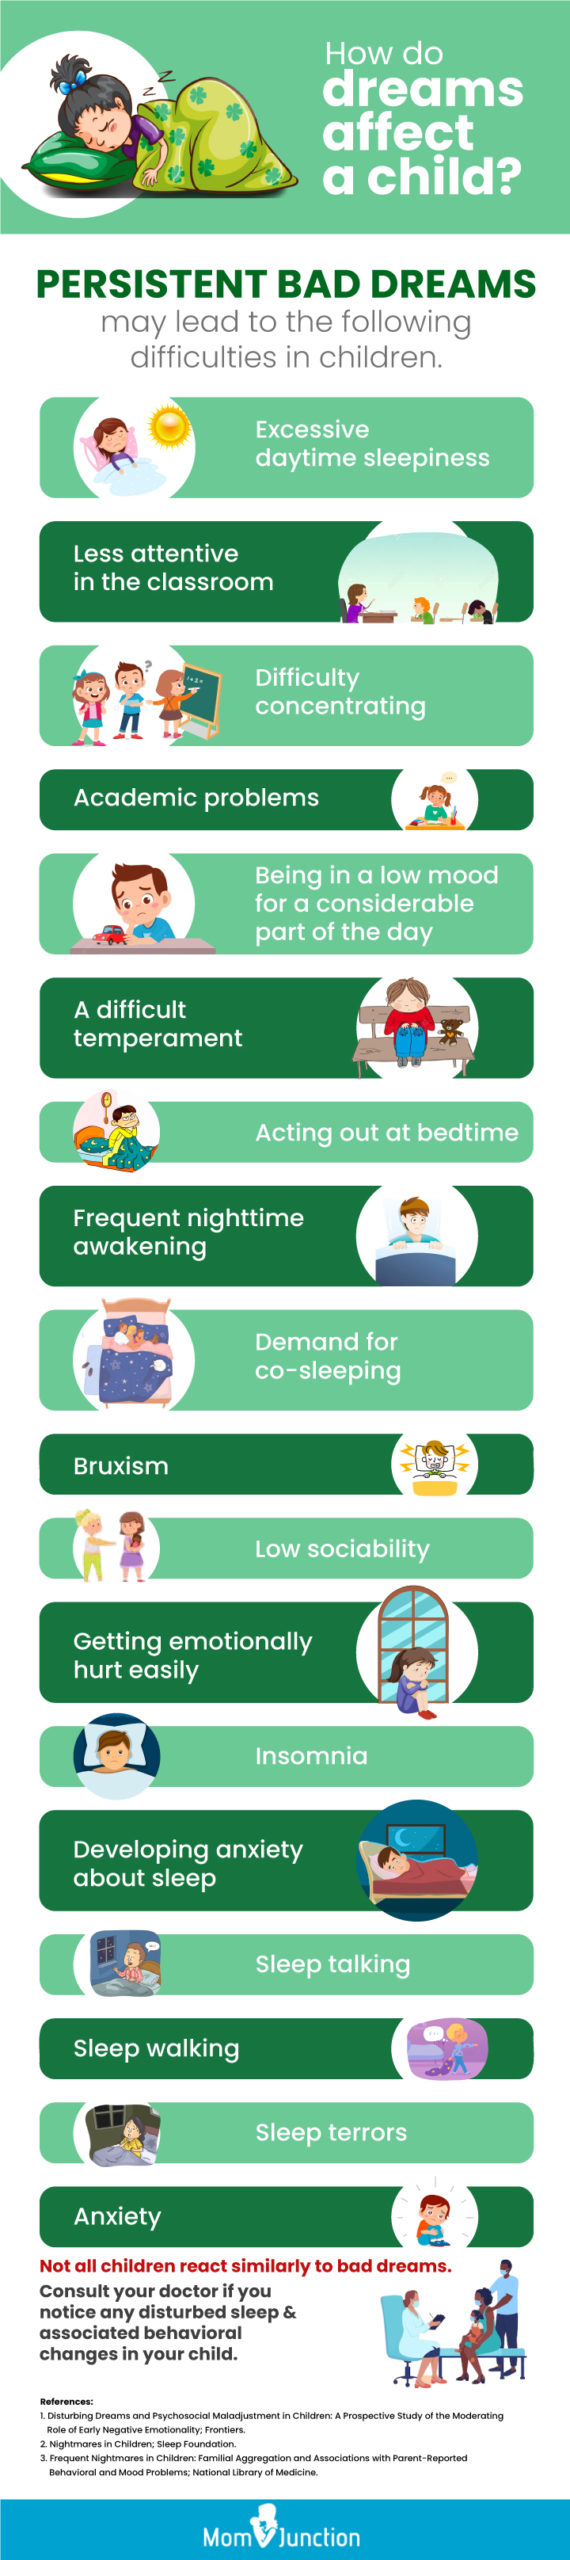 How do dreams affect a child [infographic]